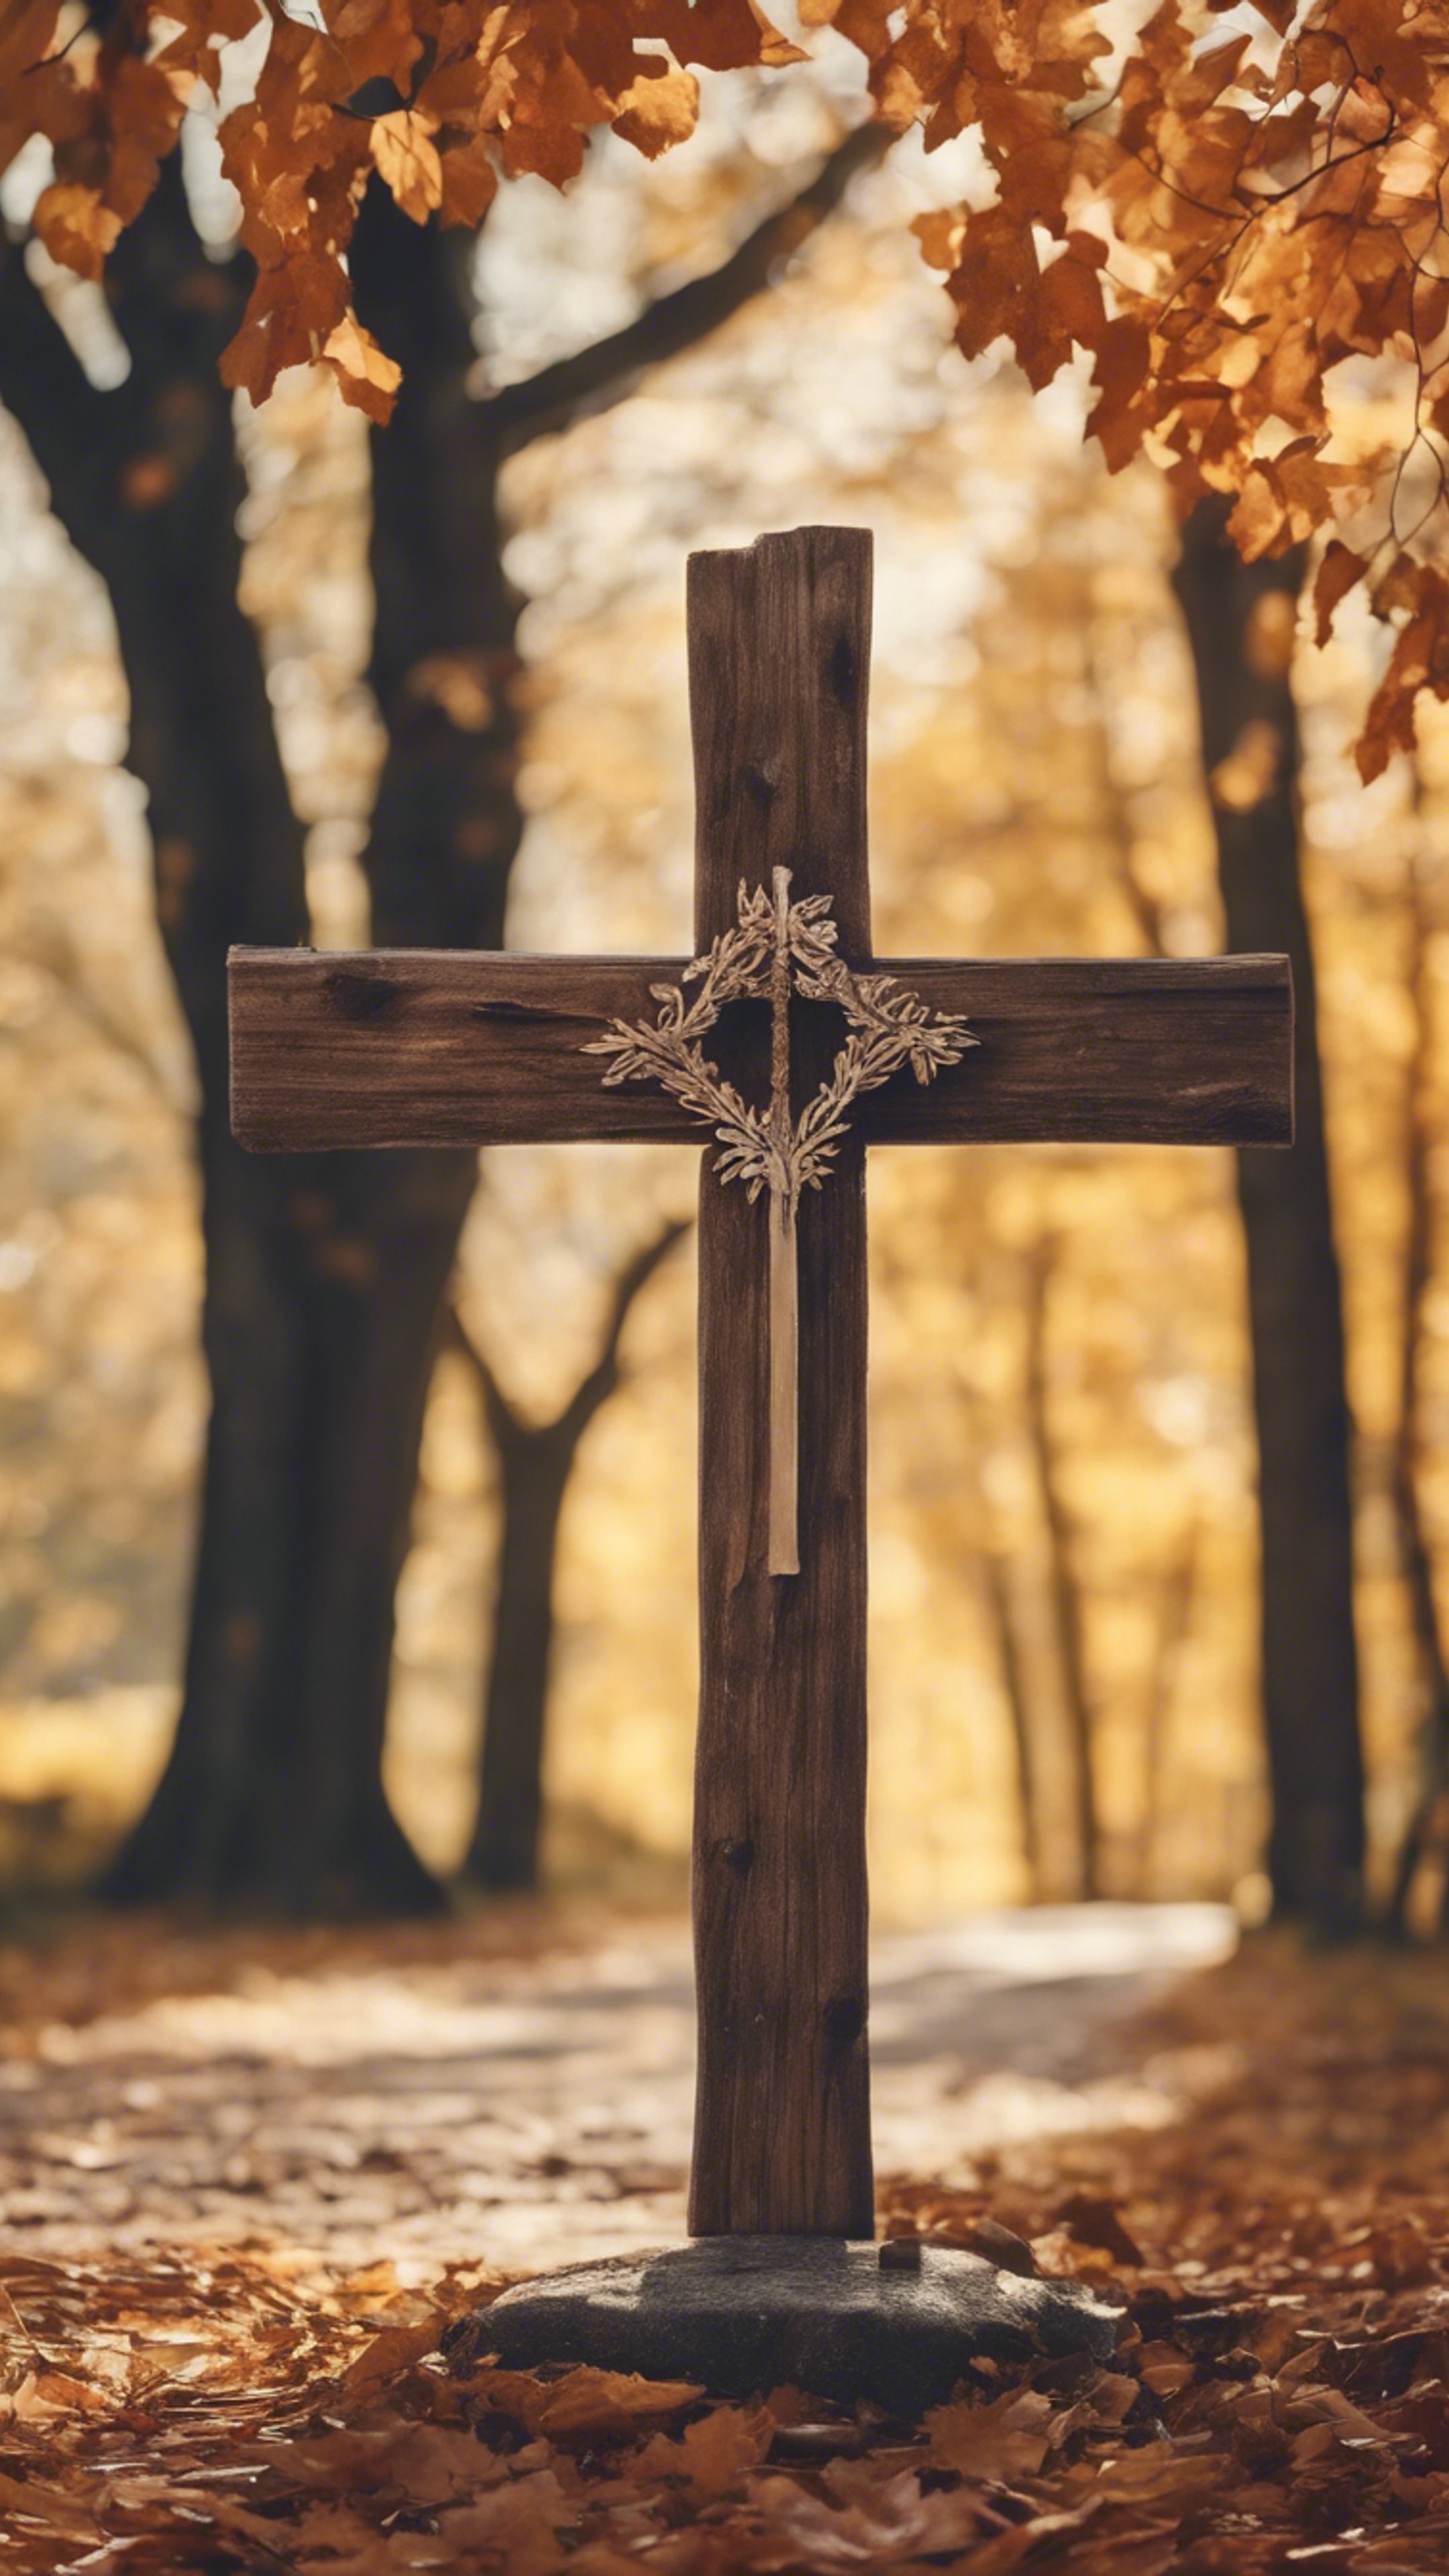 A rustic wooden cross standing by a country road, surrounded by autumn leaves. Ταπετσαρία[8ef87987617941c481d6]